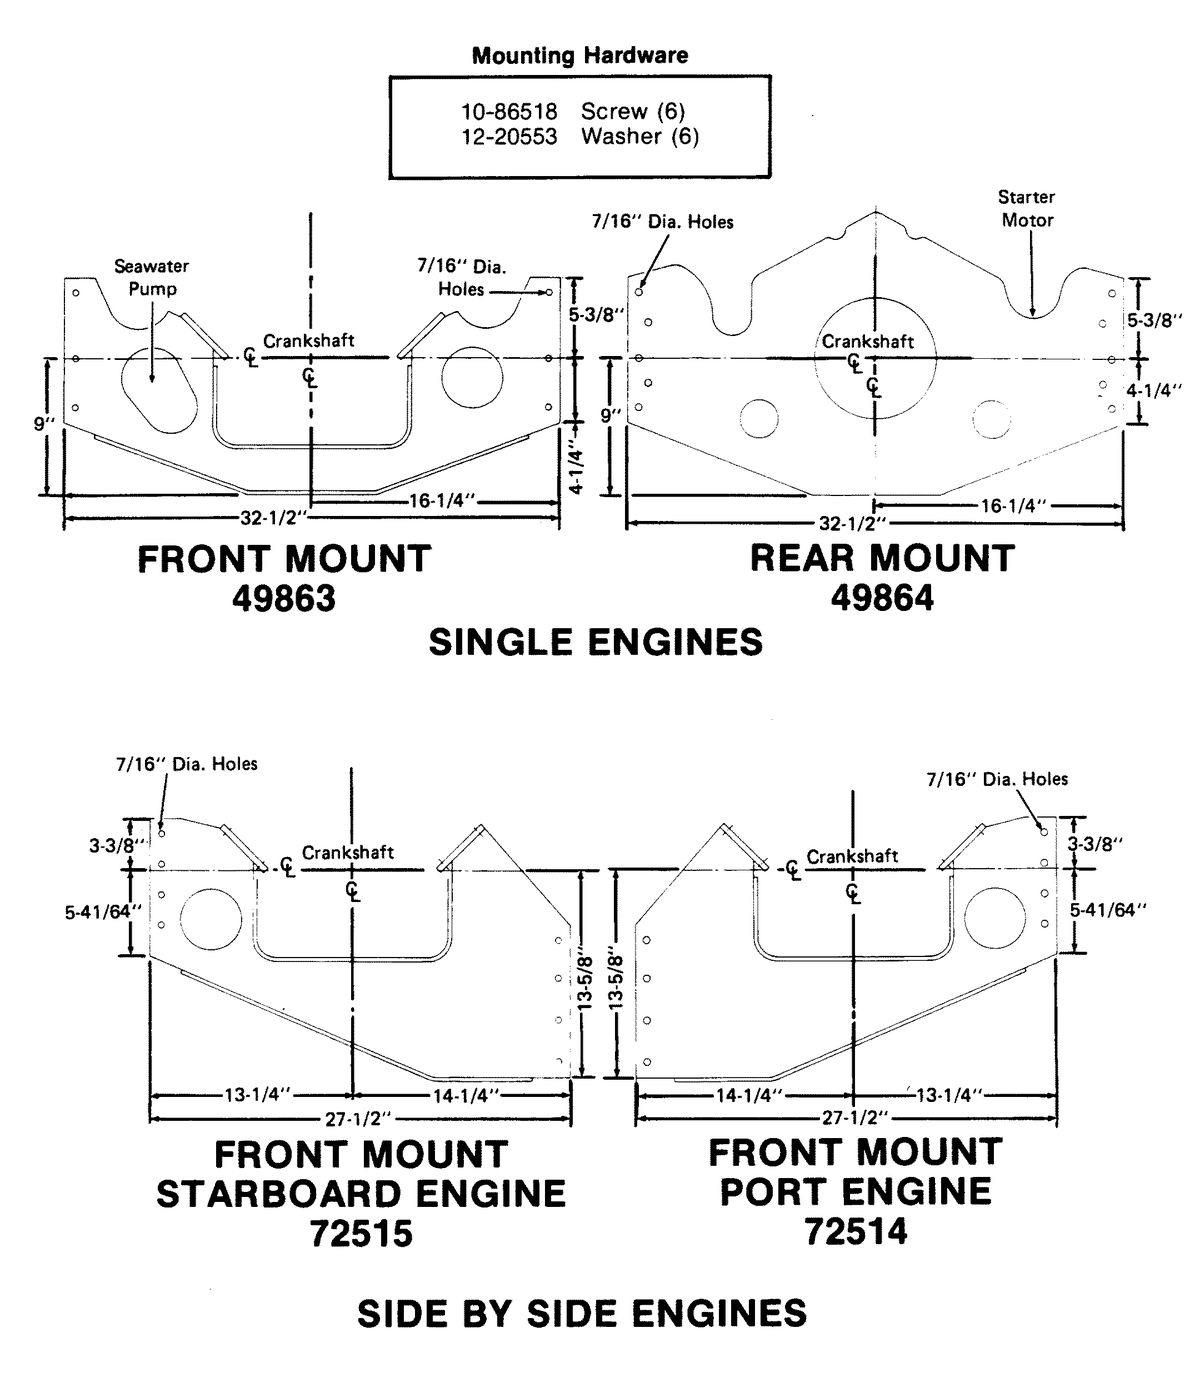 MERCRUISER 370 H.P. TRS ENGINE (CARD 37) MOUNTING PLATES (SIDE BY SIDE ENGINES)